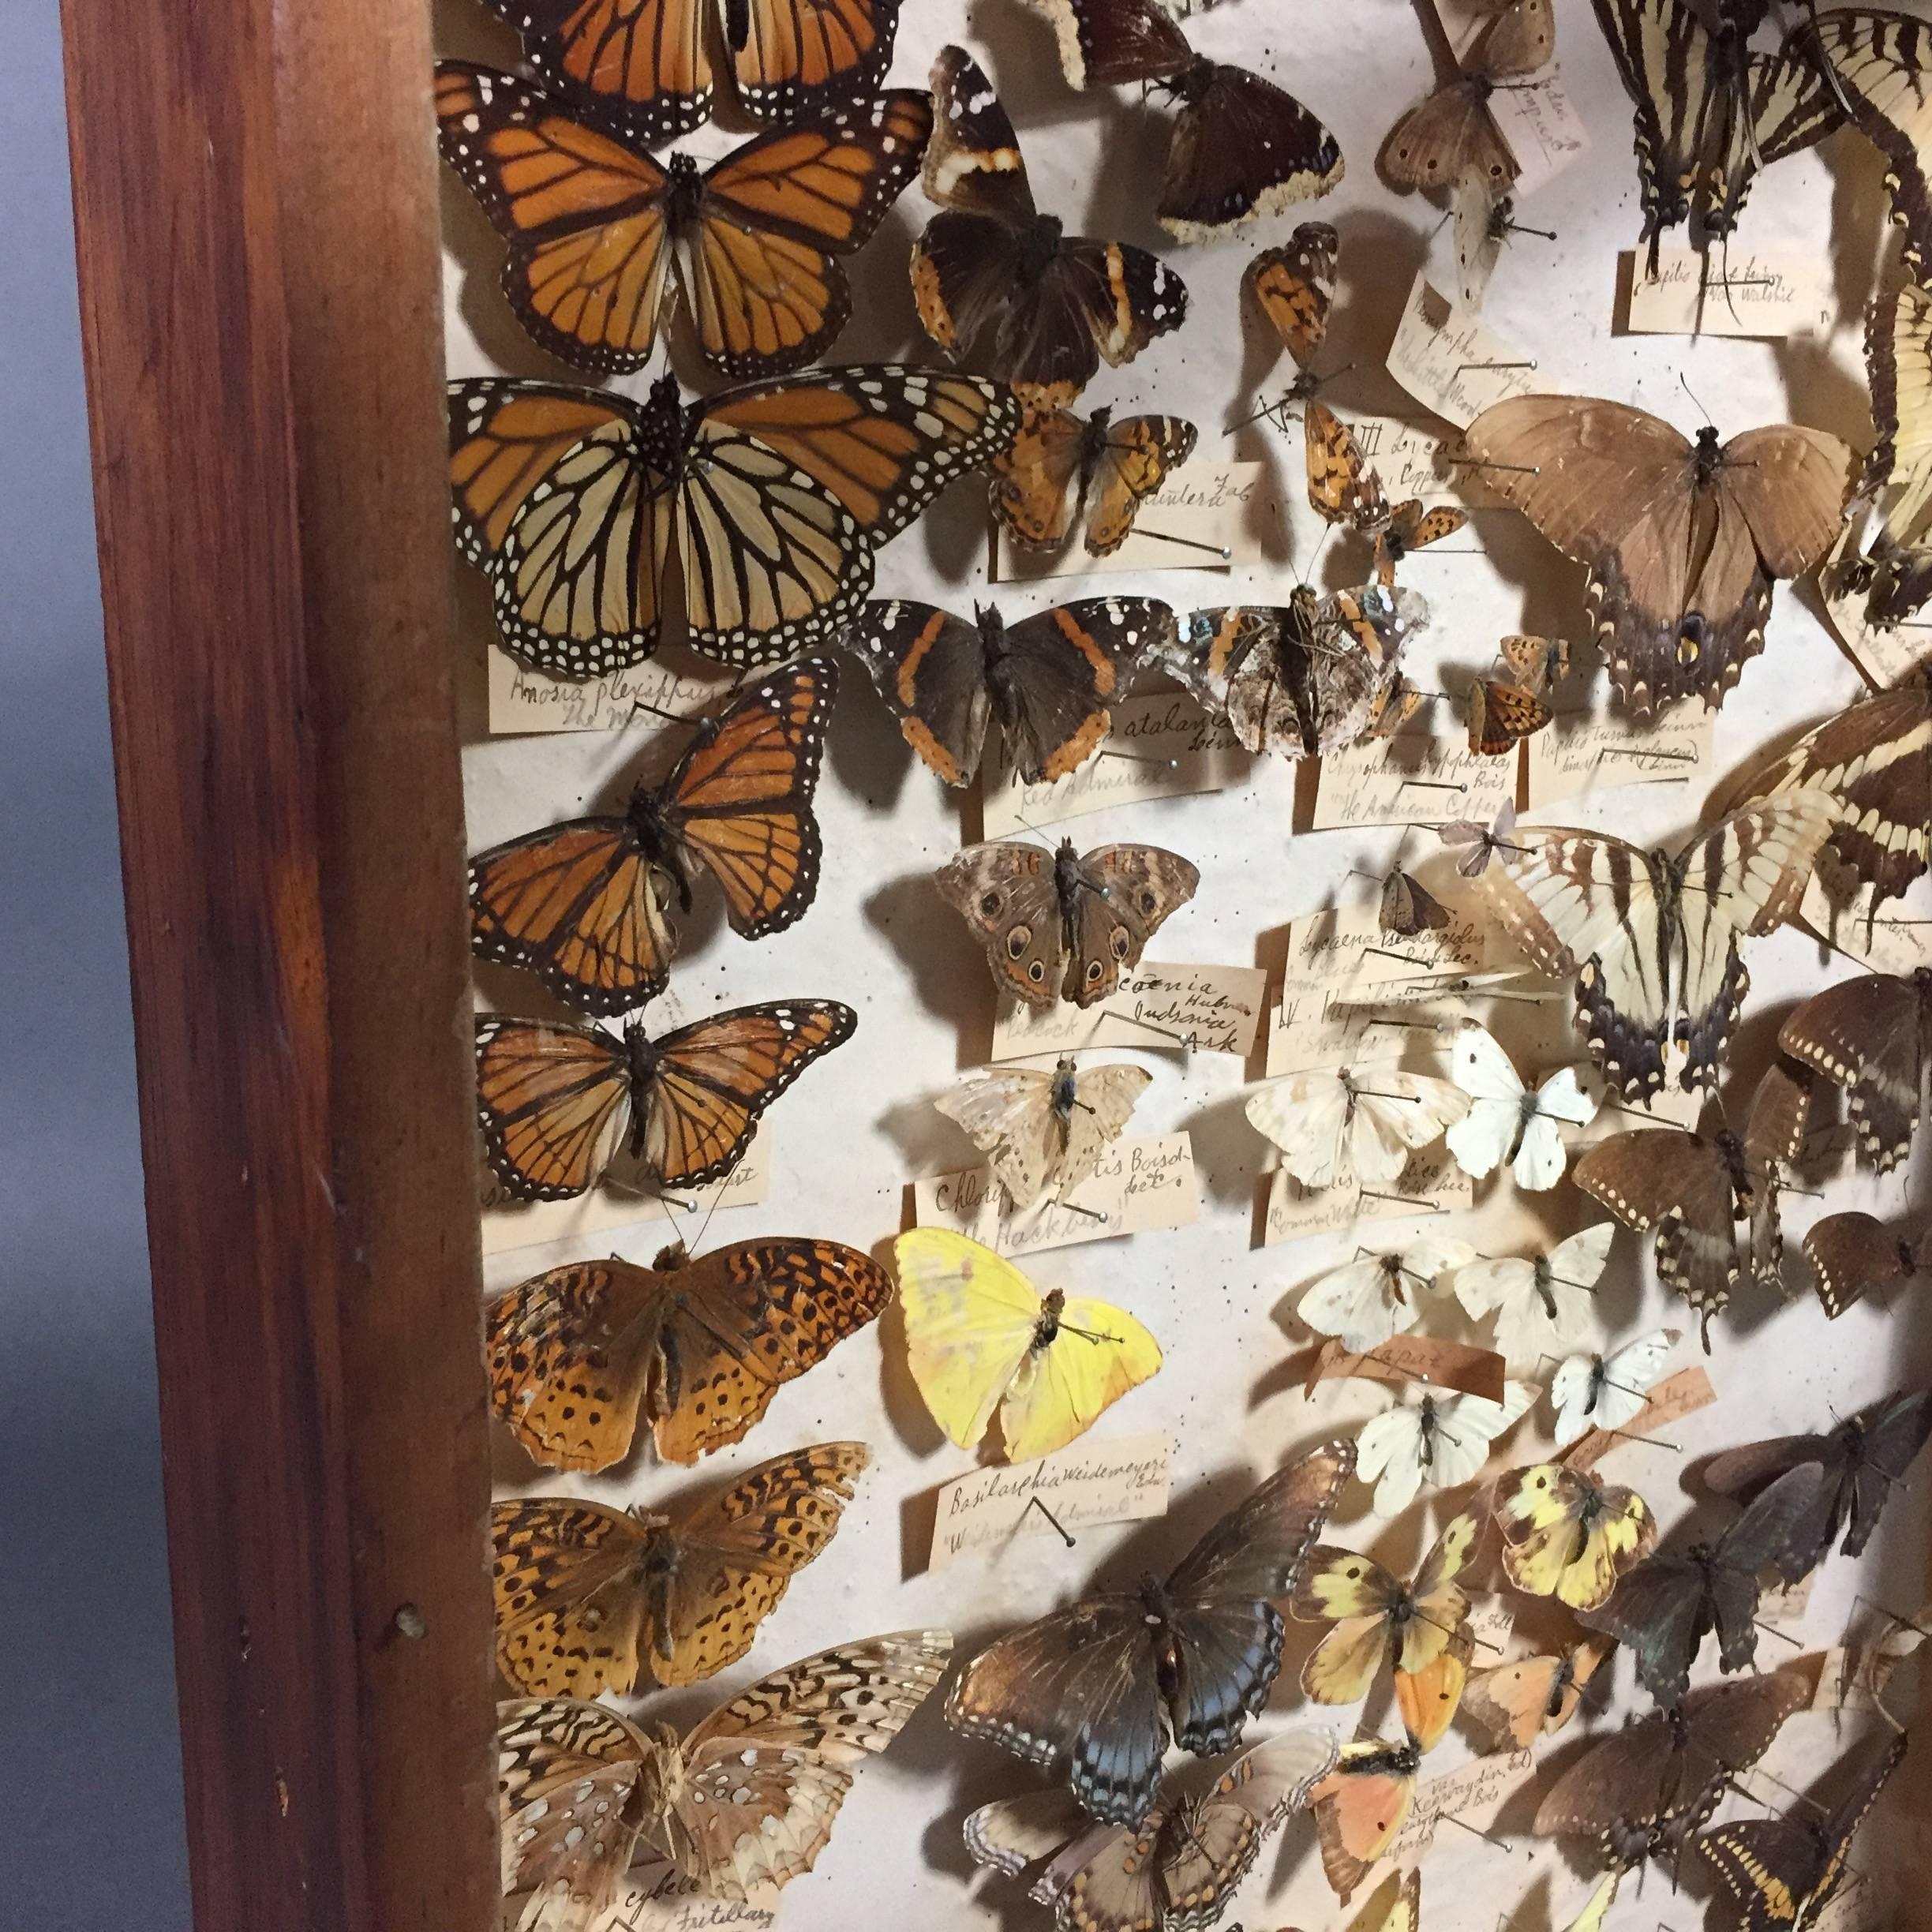 Early 20th Century 82 Specimen Butterfly Display Box, Hand Labeled and Framed, circa 1900